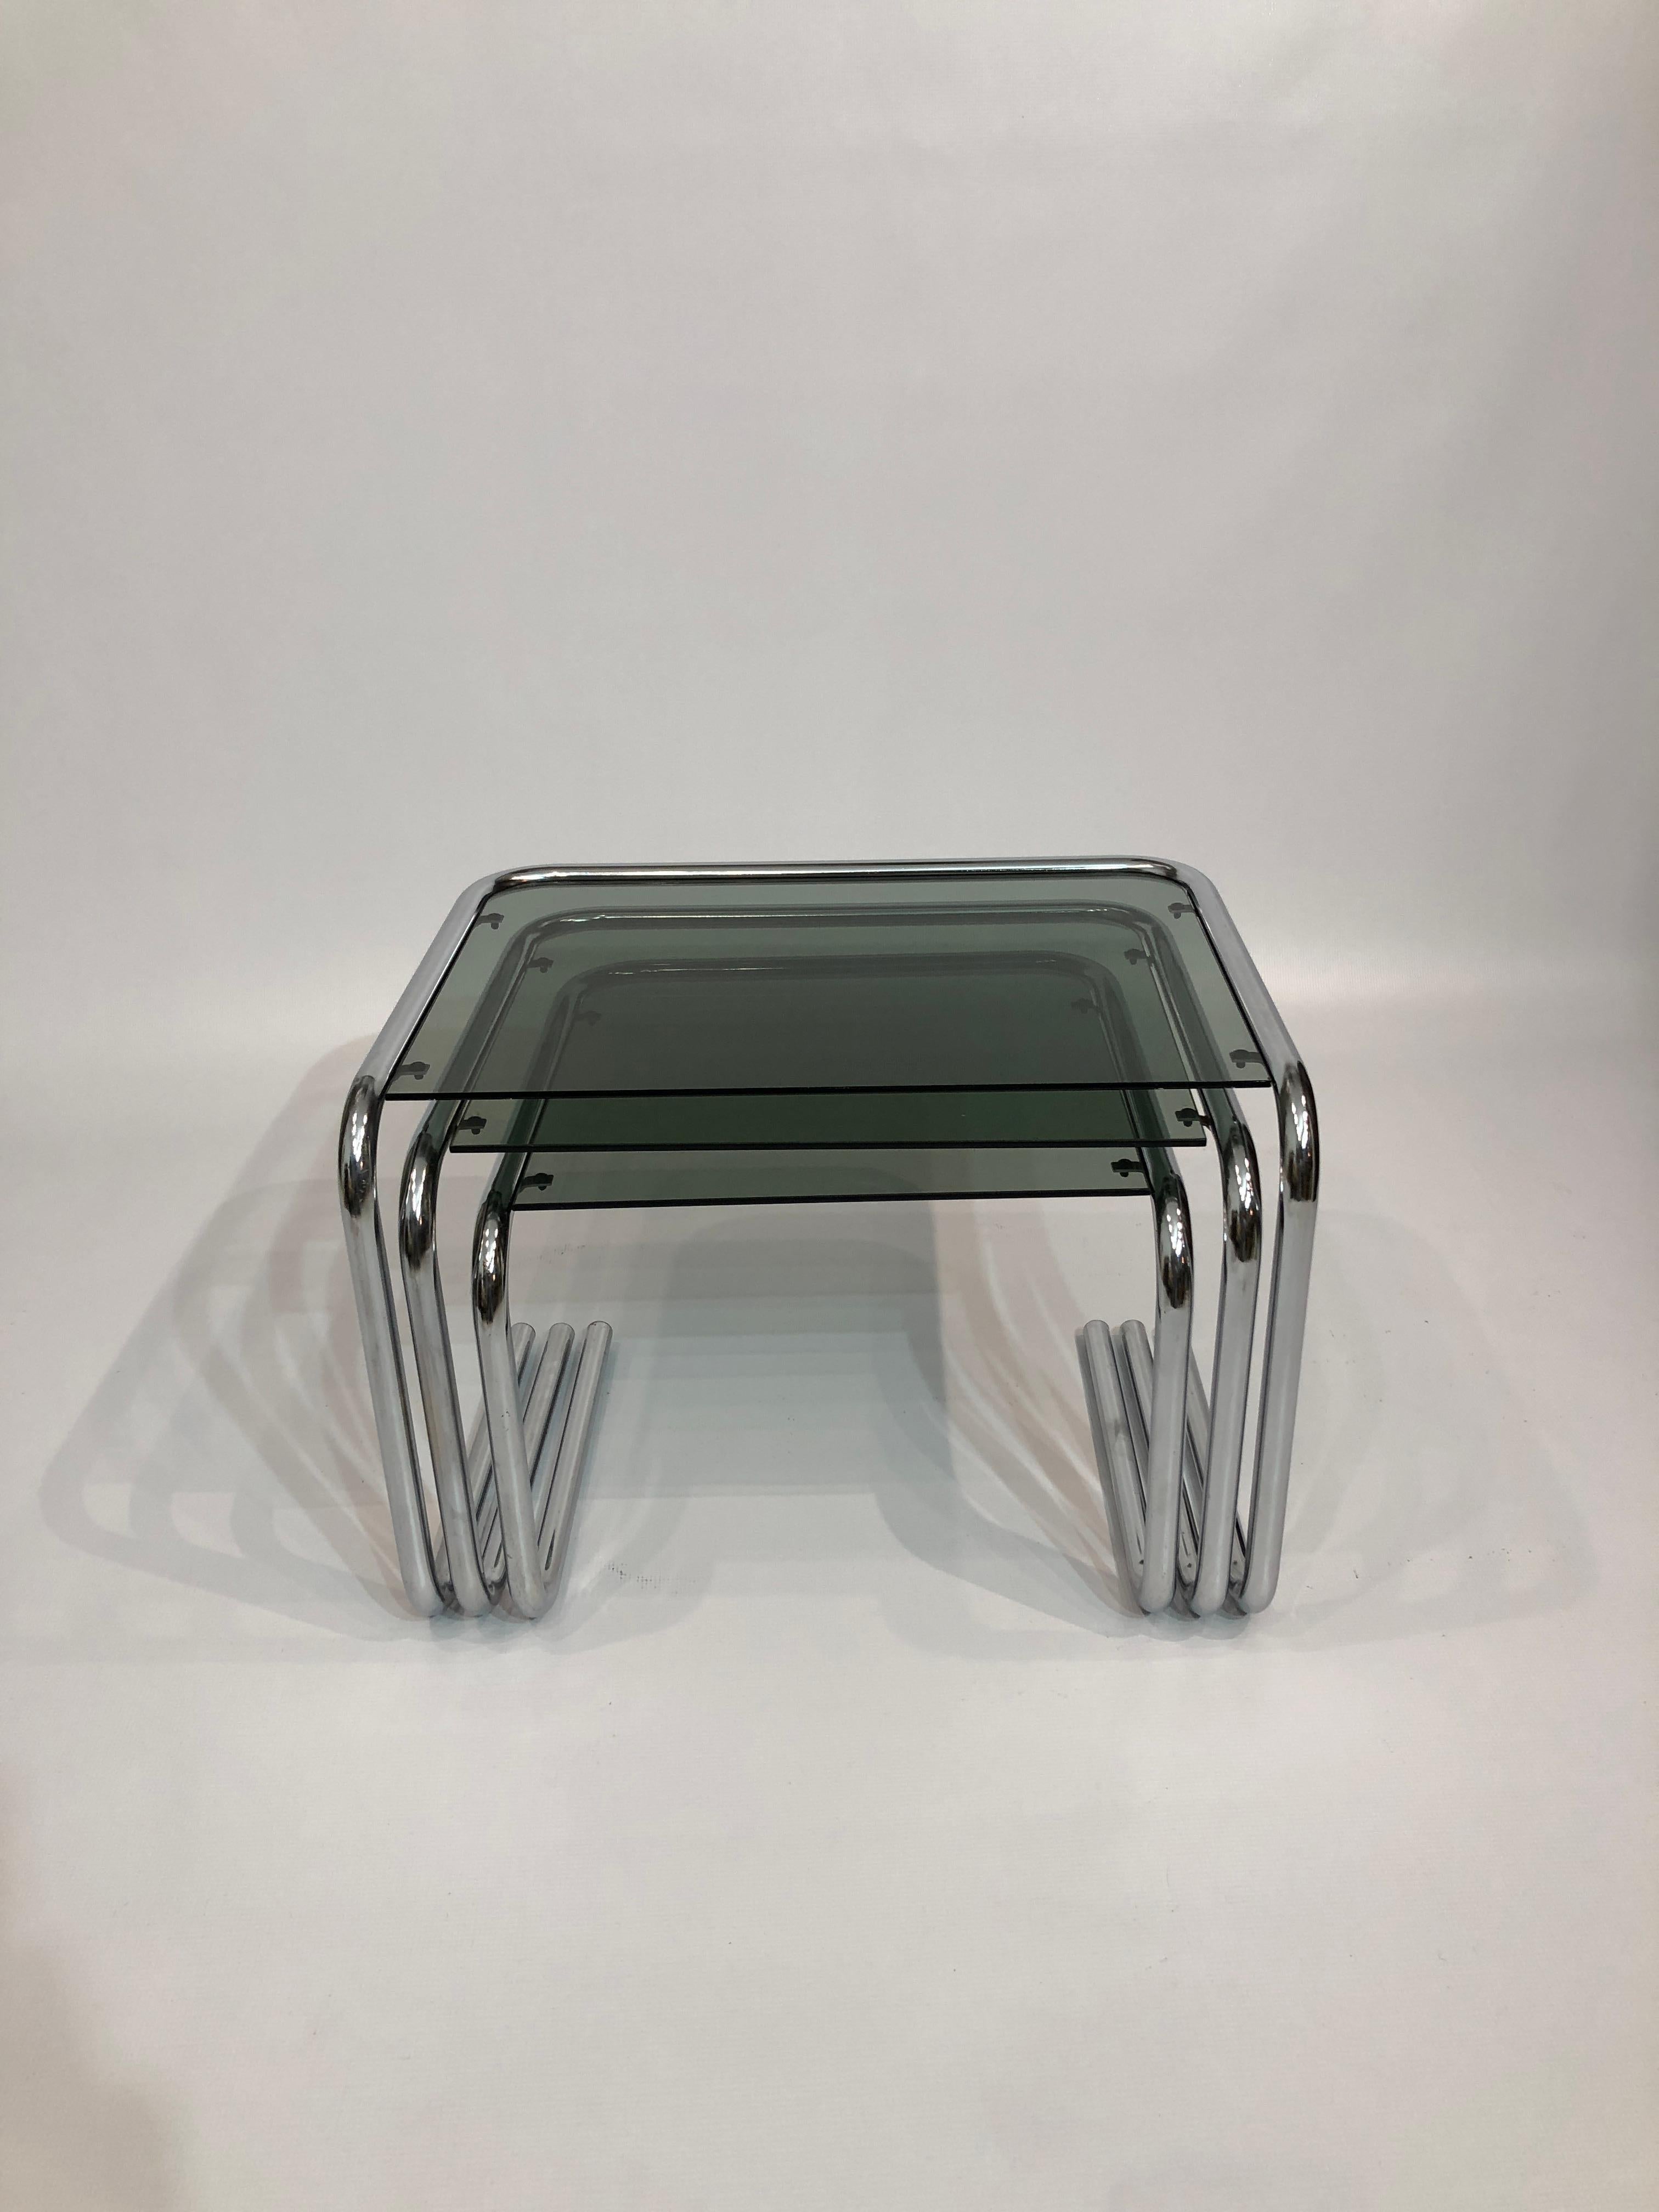 A nest of late-1970s Italian tables in chrome and smoked glass, featuring a smart cantilever design that oozes post-modern chic. 

The smoked green glass sits in a chrome frame, with tubular polygonal piping –– very much in the style of luxury